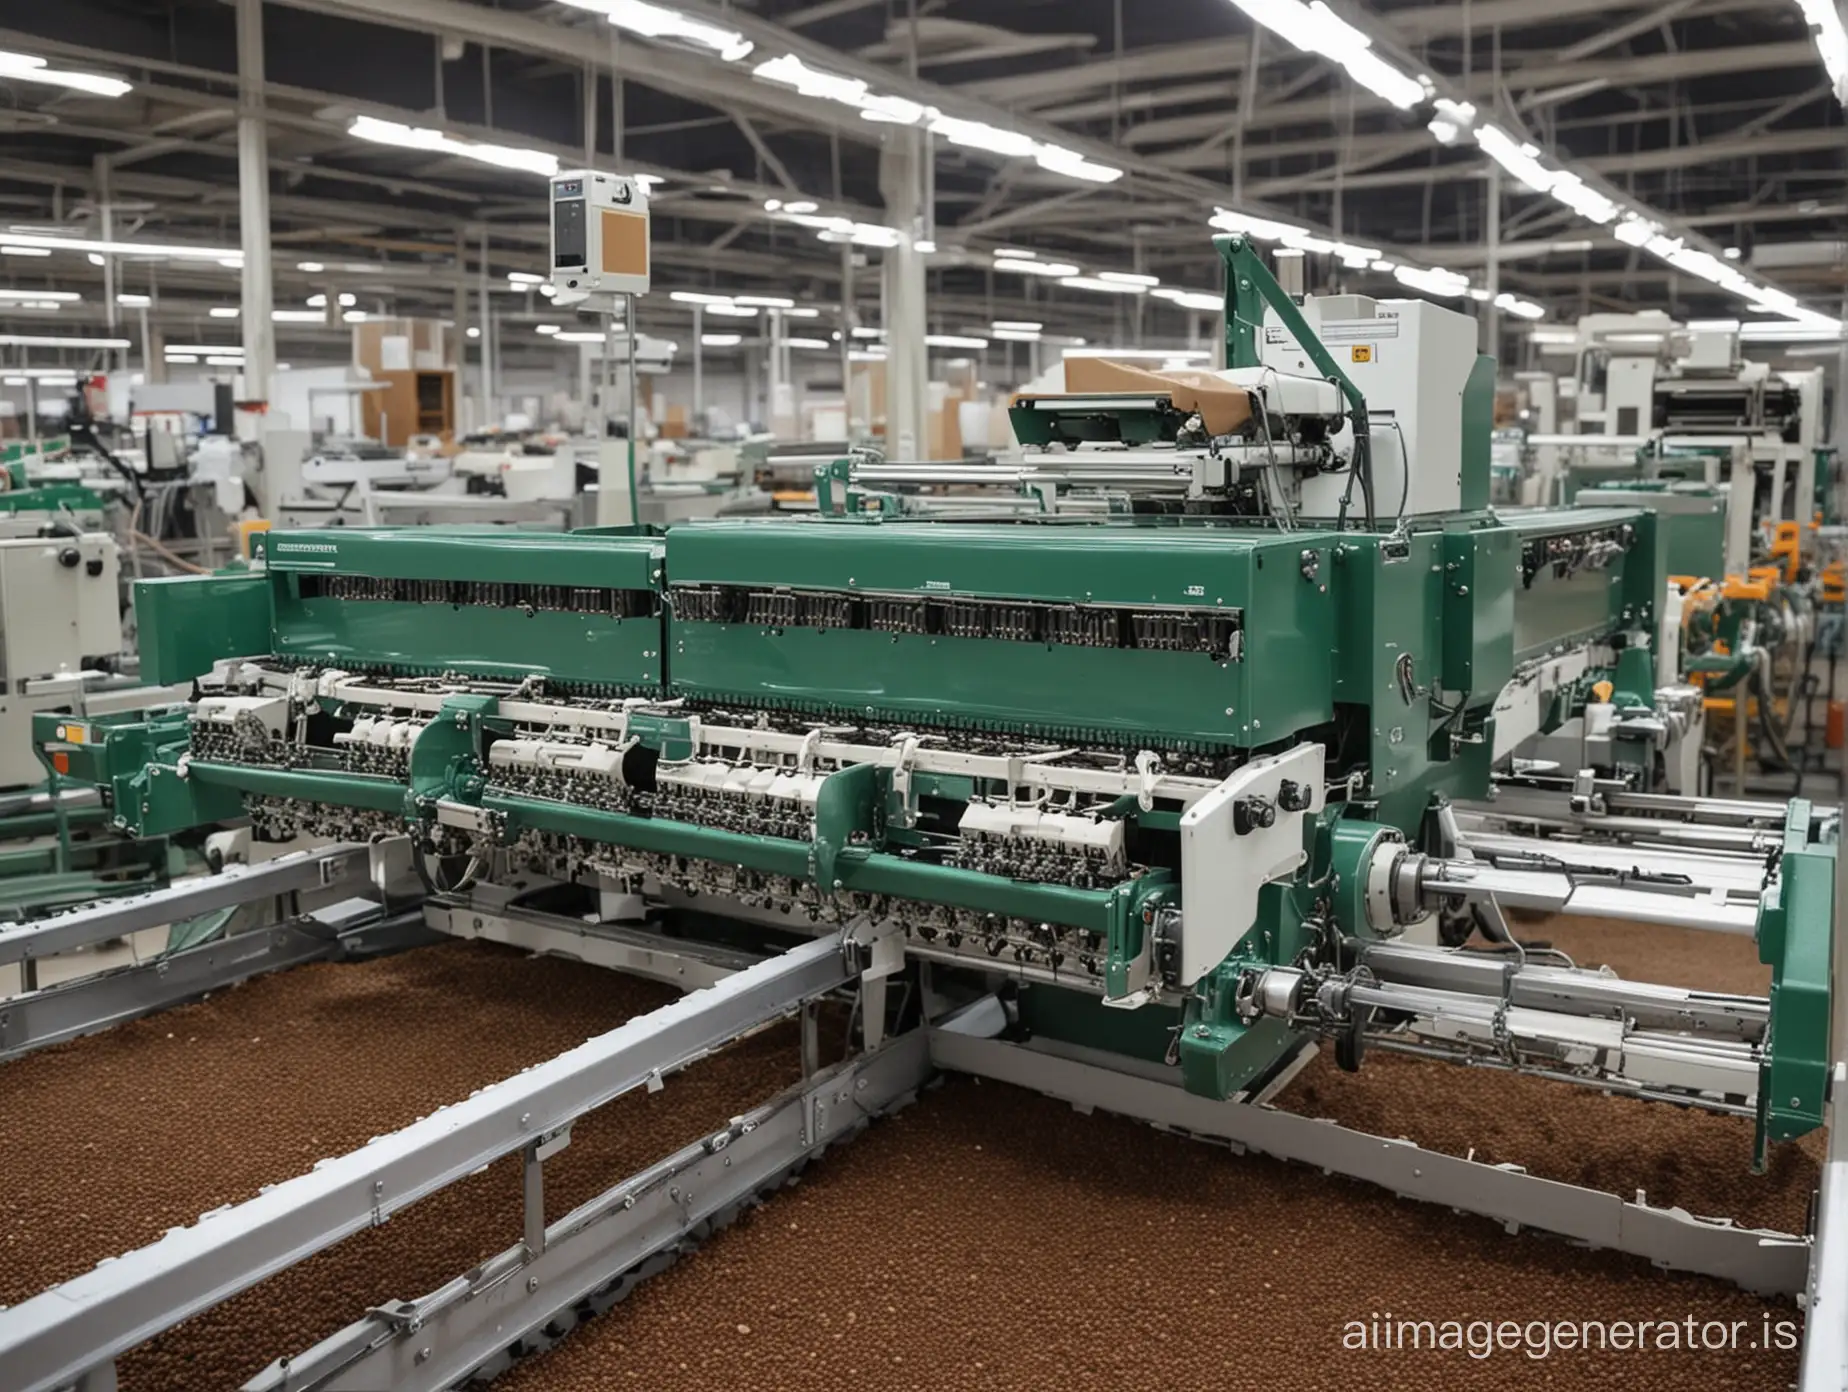 Advanced-Seed-Sowing-Technology-on-Assembly-Line